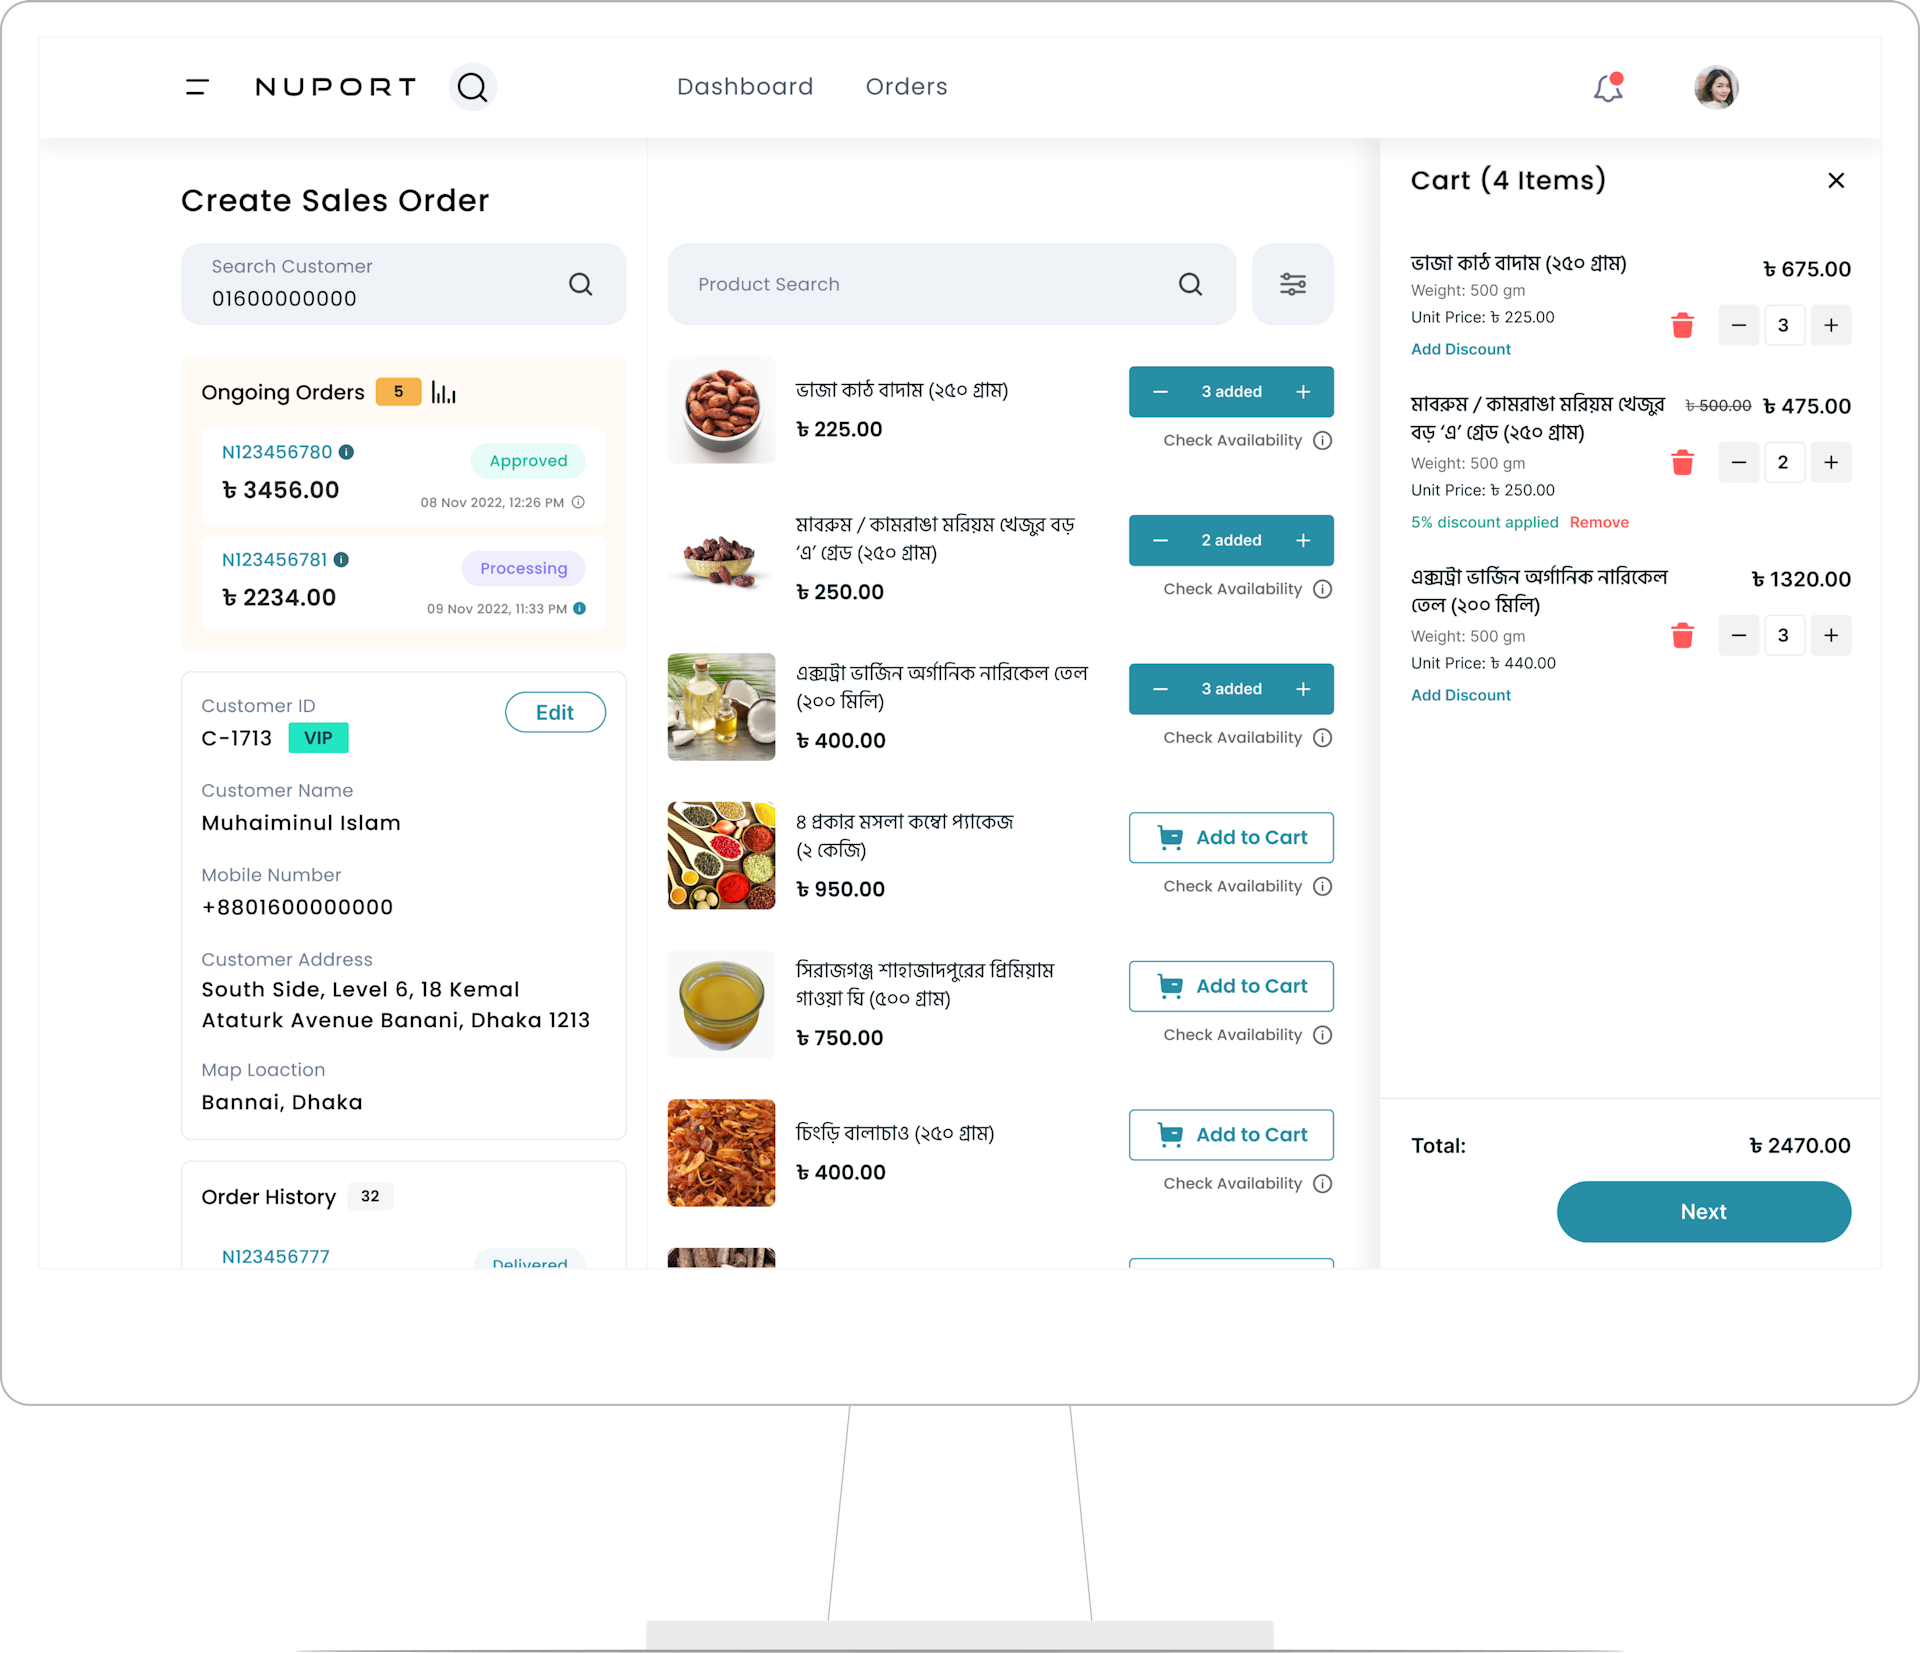 Nuport web app's create sales order page for e-commerce